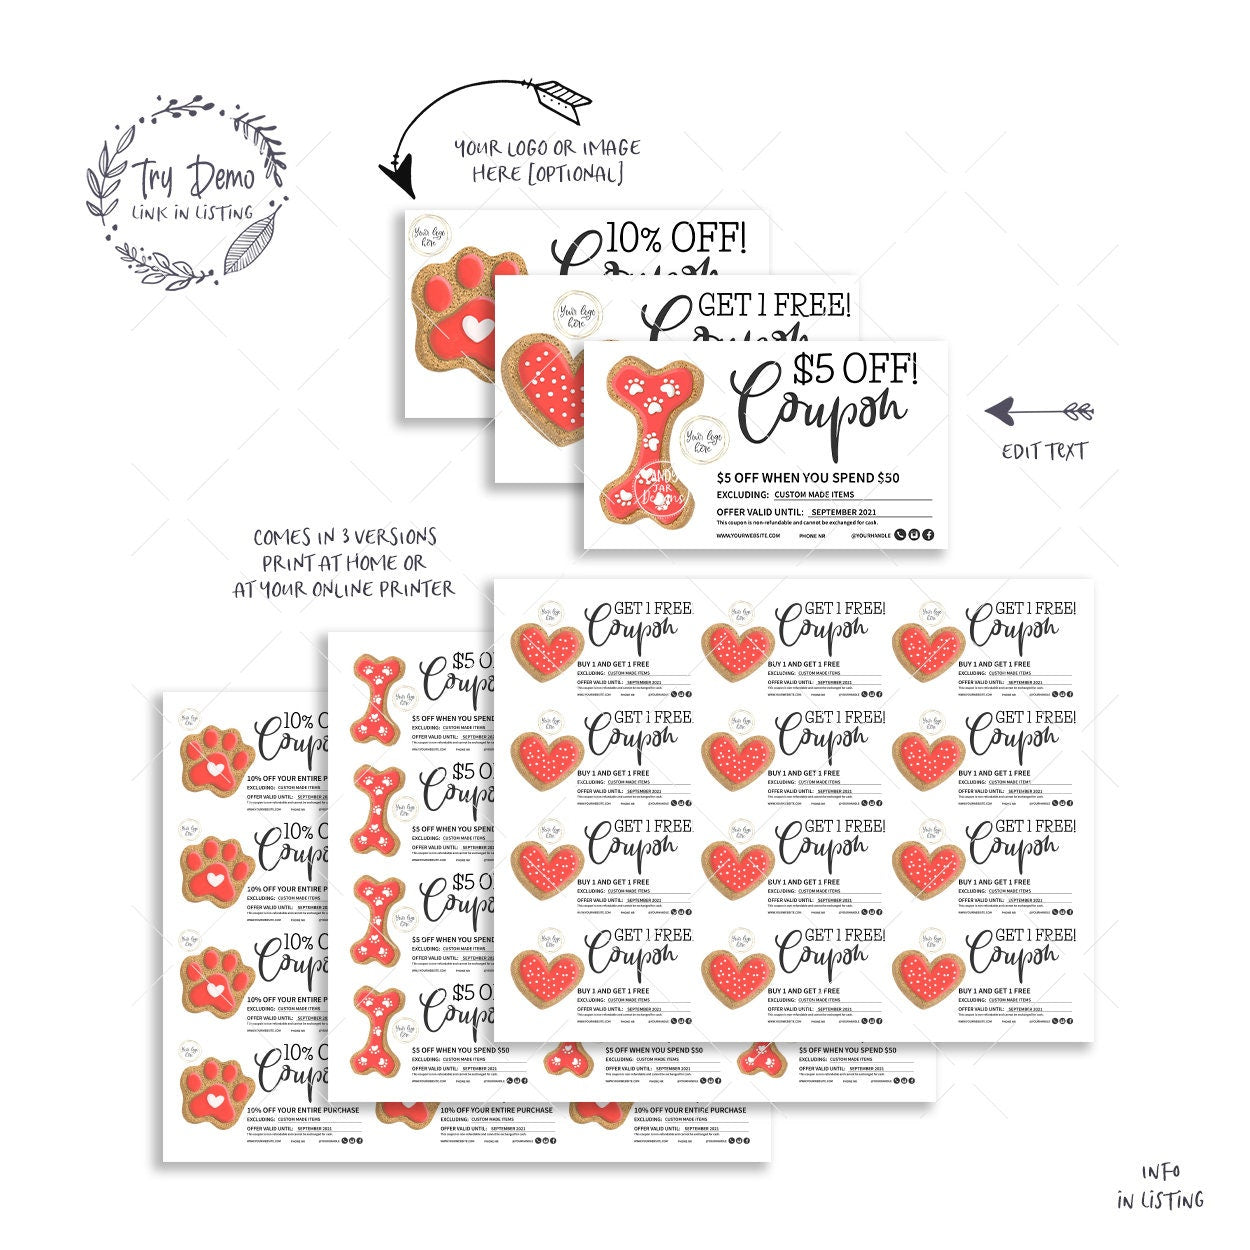 Dog Bakery Gift Coupons, Valentine Cookies - Candy Jar Studios